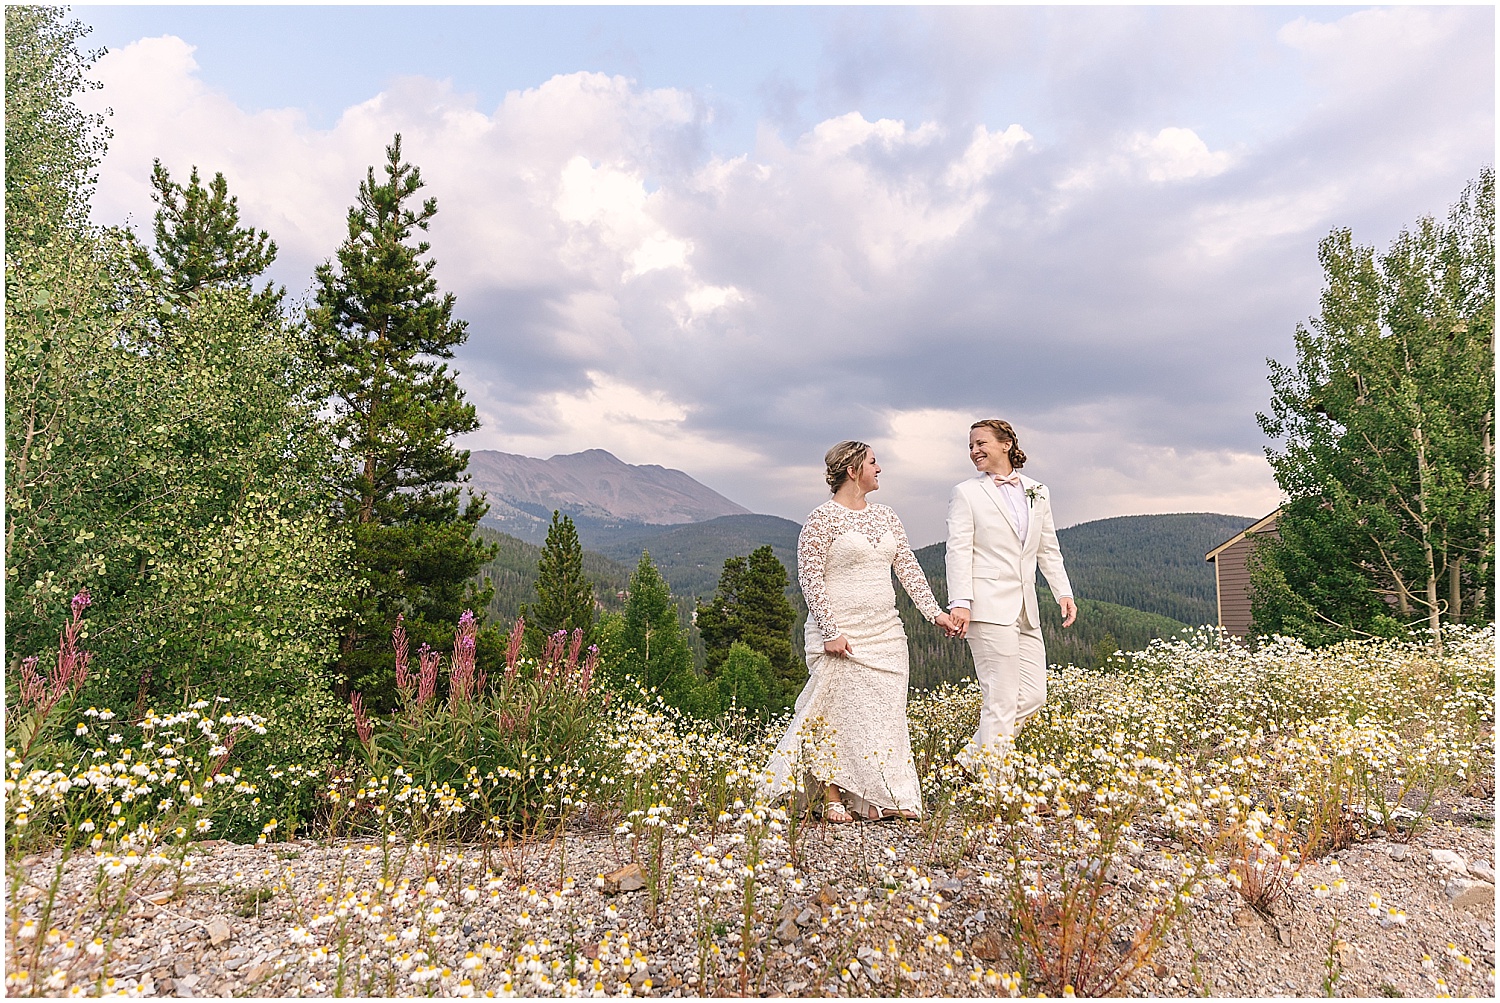 Two brides walking in a field of flowers at Breckenridge wedding venue